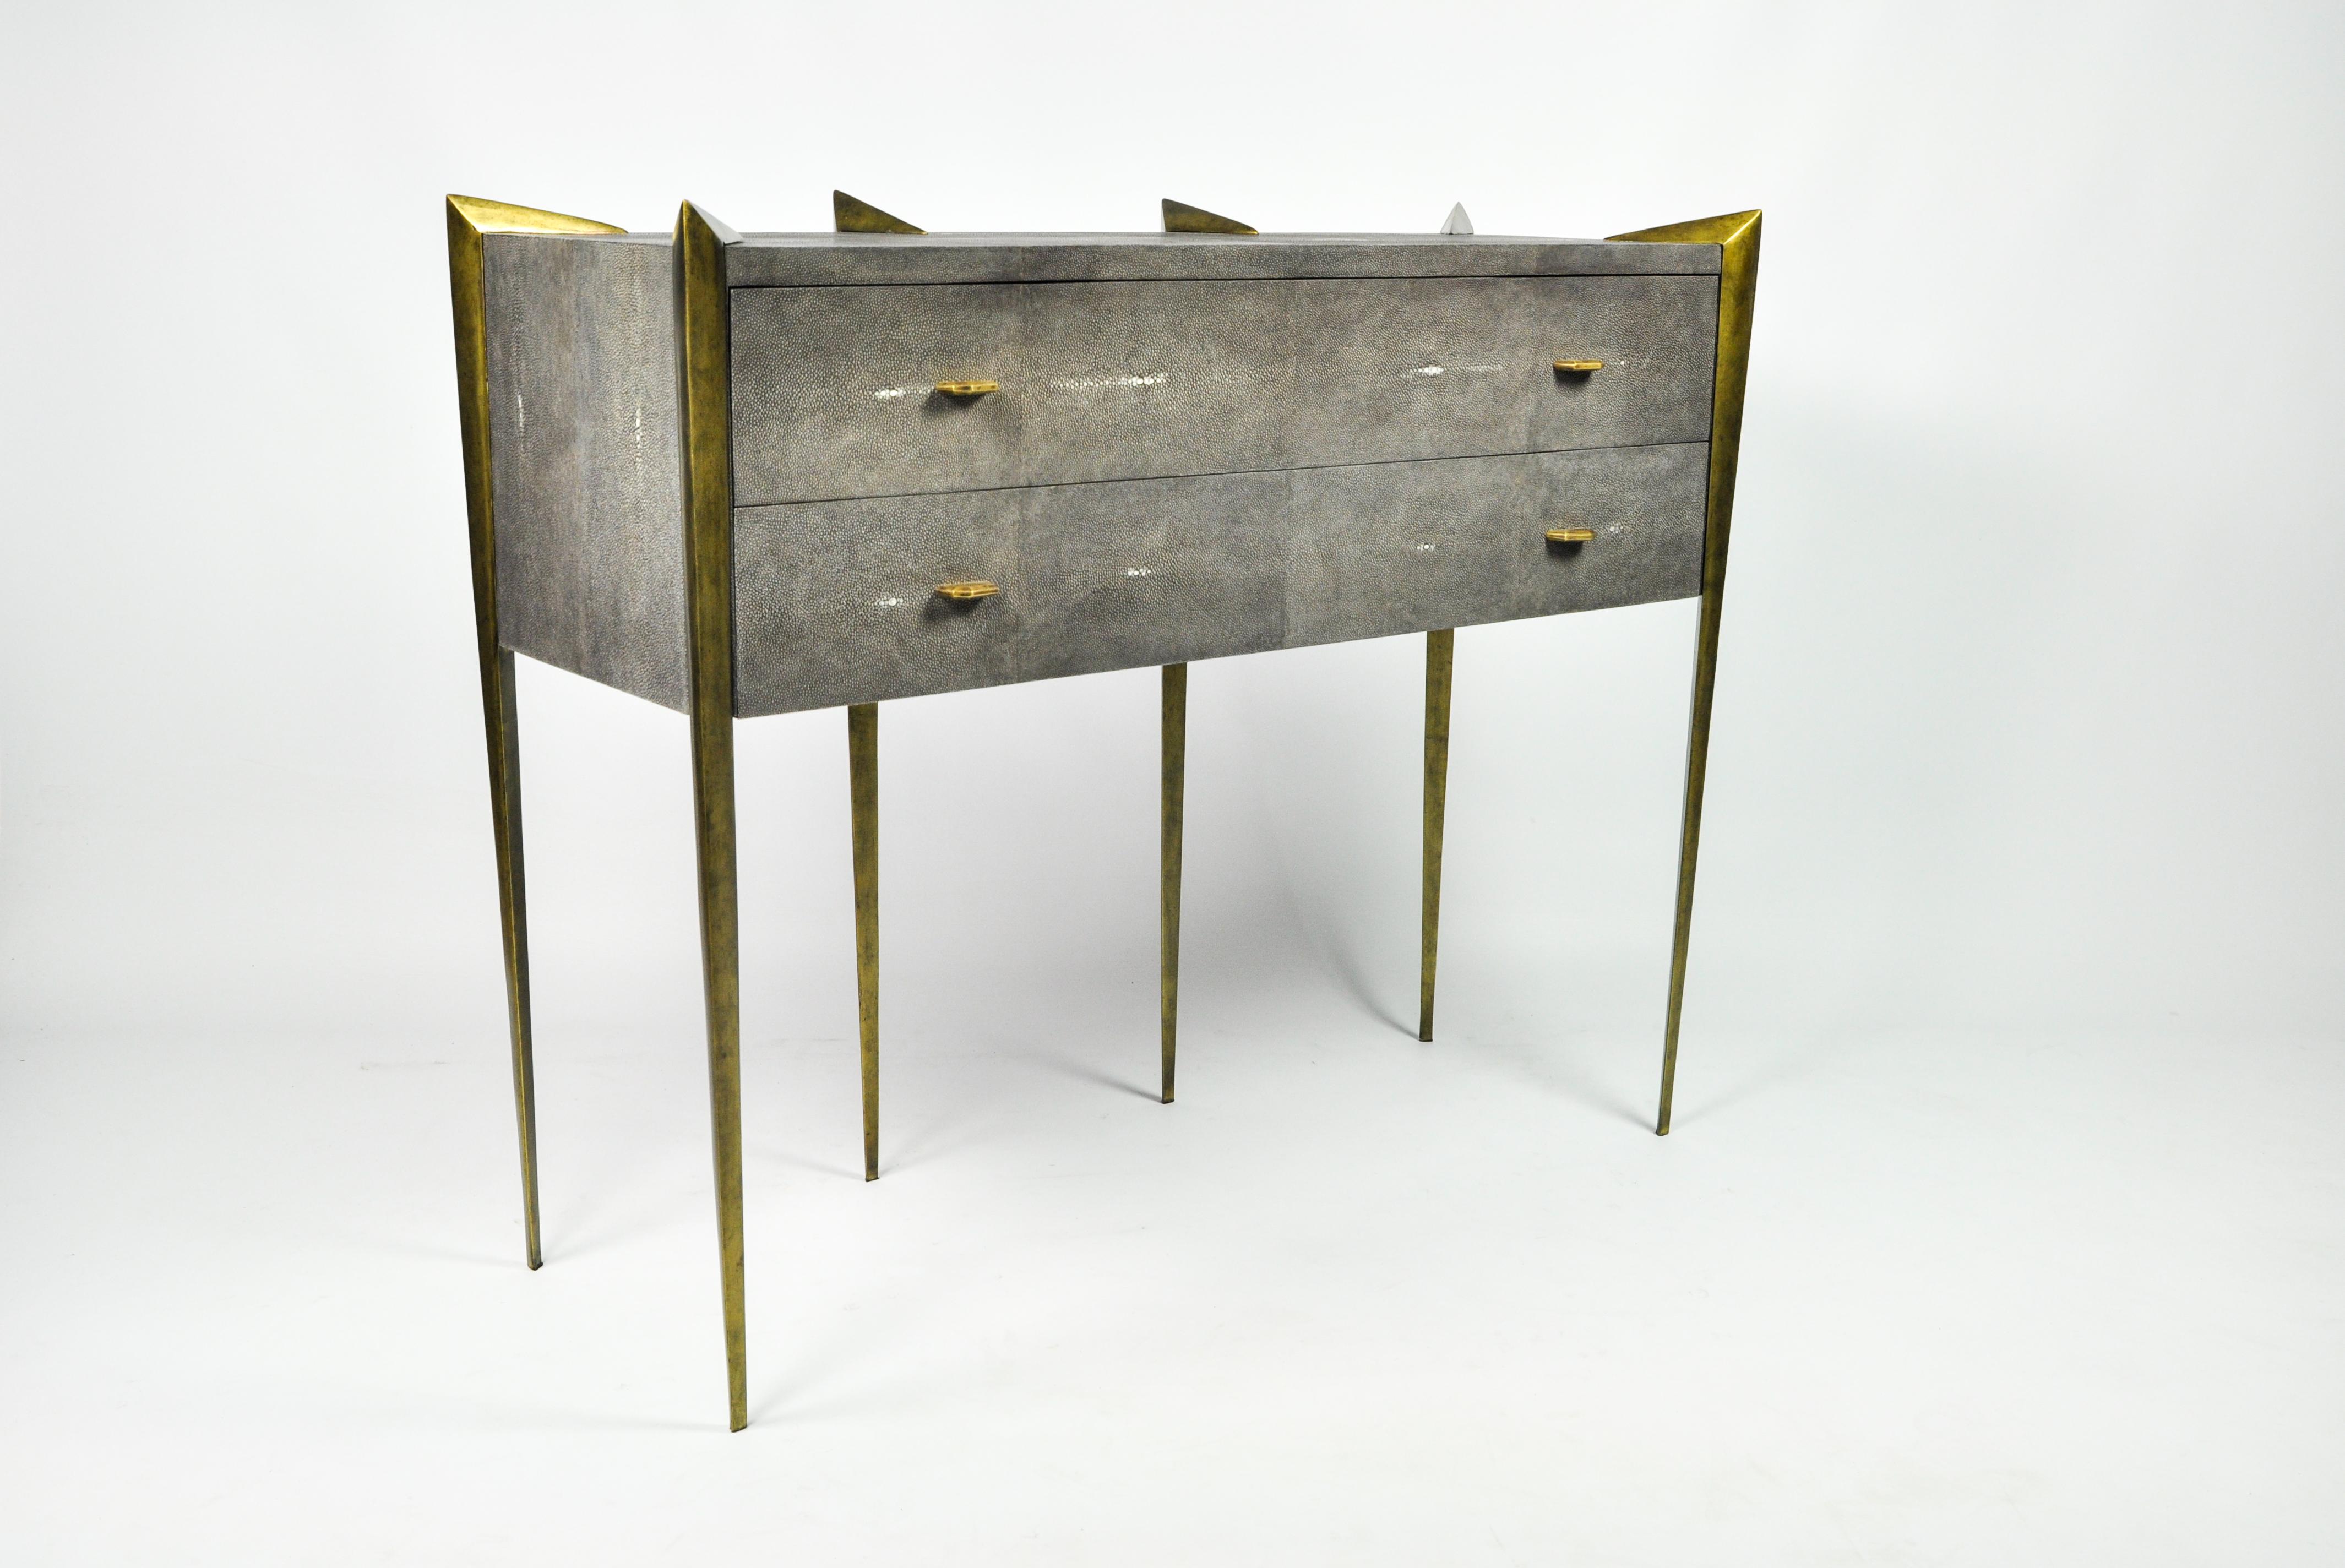 This chest of drawers from our collection CIRCINI is made of dark grey shagreen (our ref CARBON).
It has 2 drawers with brass knobs.
The case is mounted between claws and reminds a solitaire ring.
The legs have an antique brass patina.

An